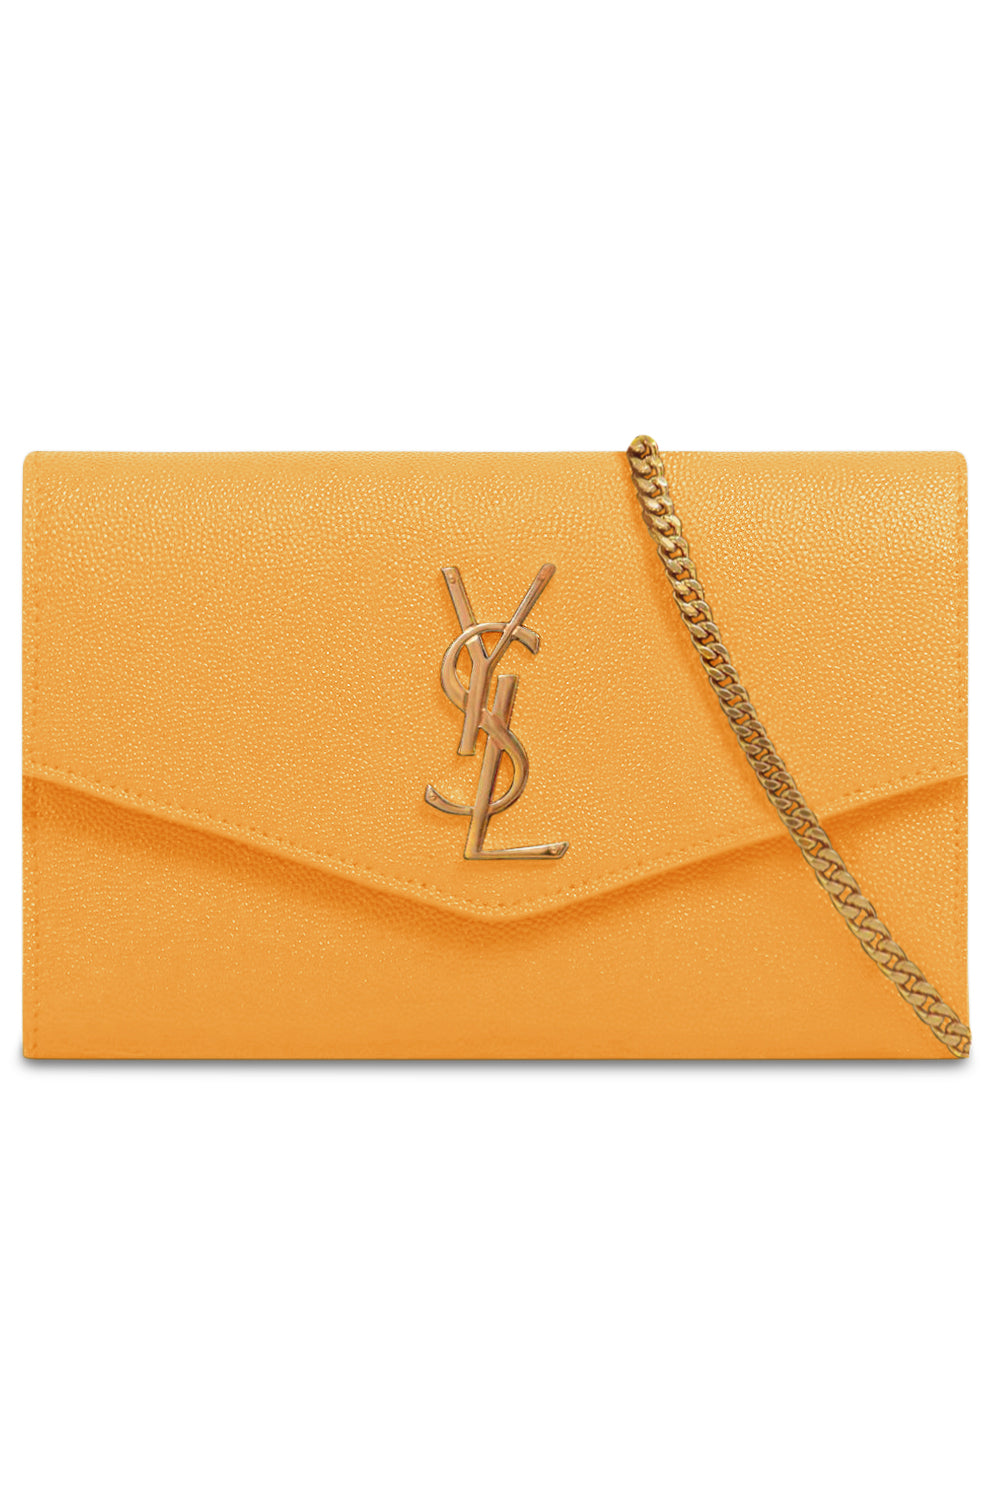 YSL Uptown Wallet on Chain with card holder  Grained Black Leather & Gold  Hardware 